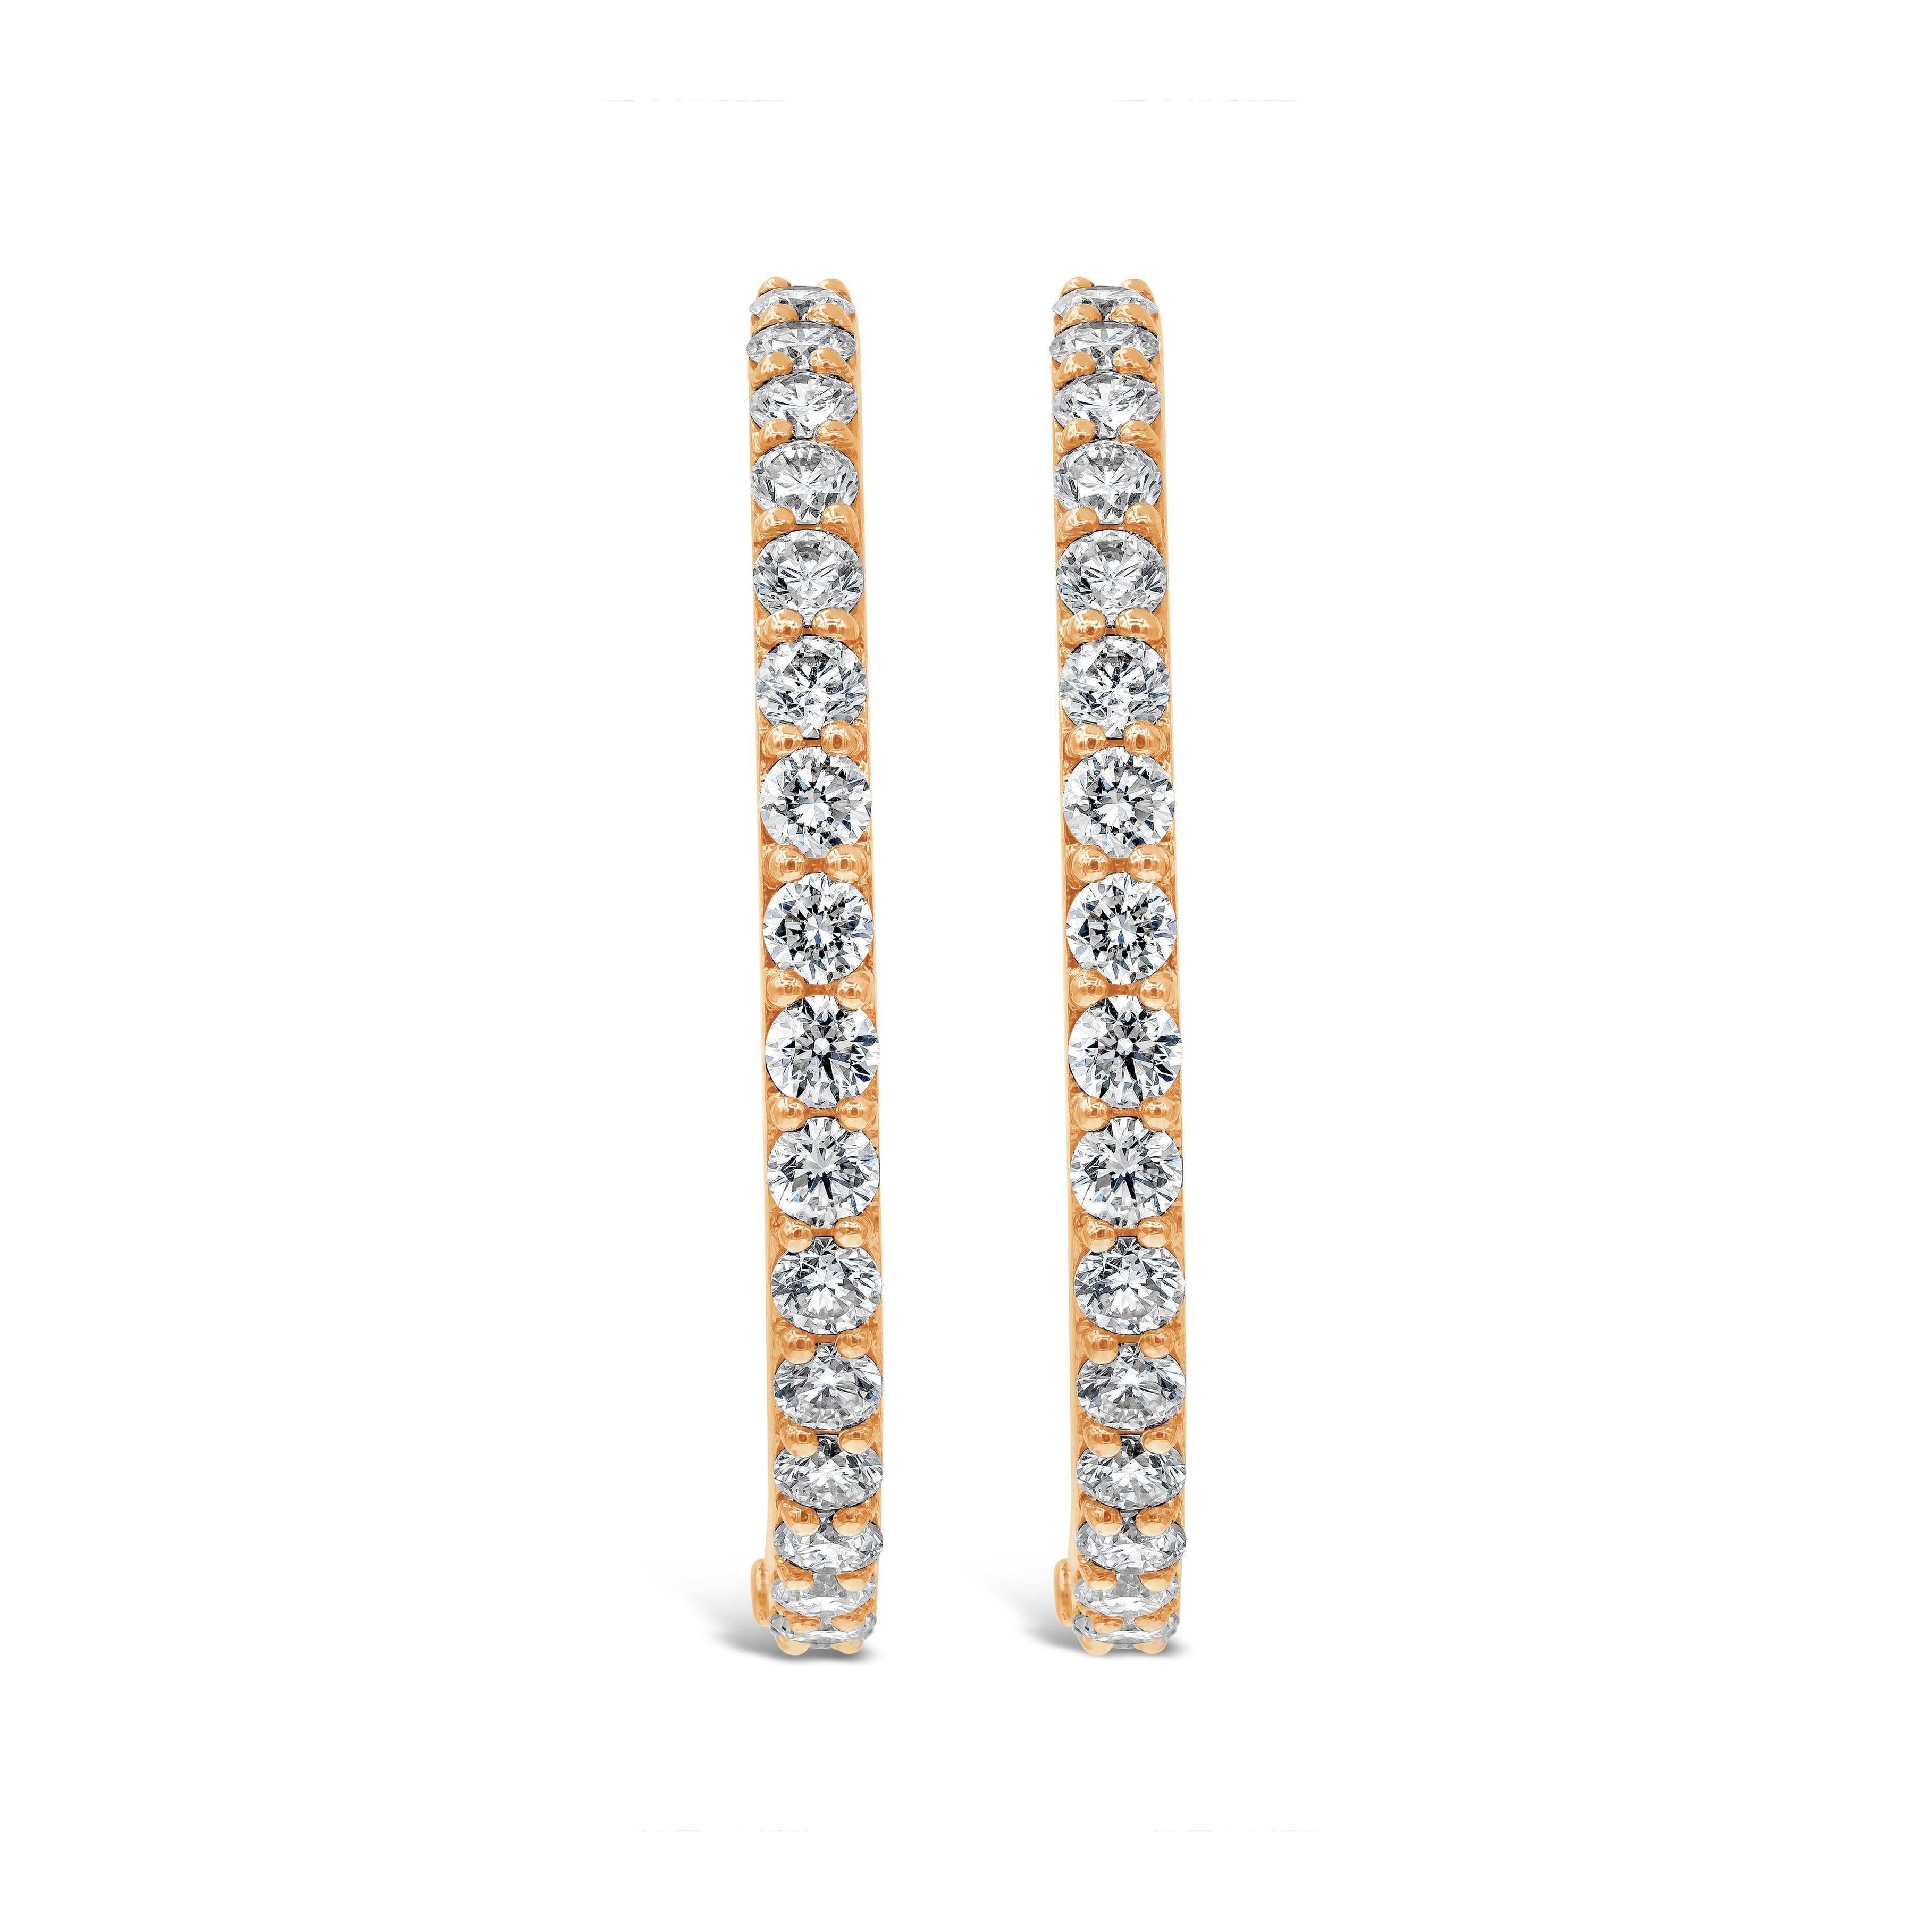 A classic style hoop earrings showcasing 6.12 carats of round brilliant diamonds, set inside and out in a traditional four prong setting, Made in 18K Rose Gold. 

Style available in different price ranges. Prices are based on your selection of the